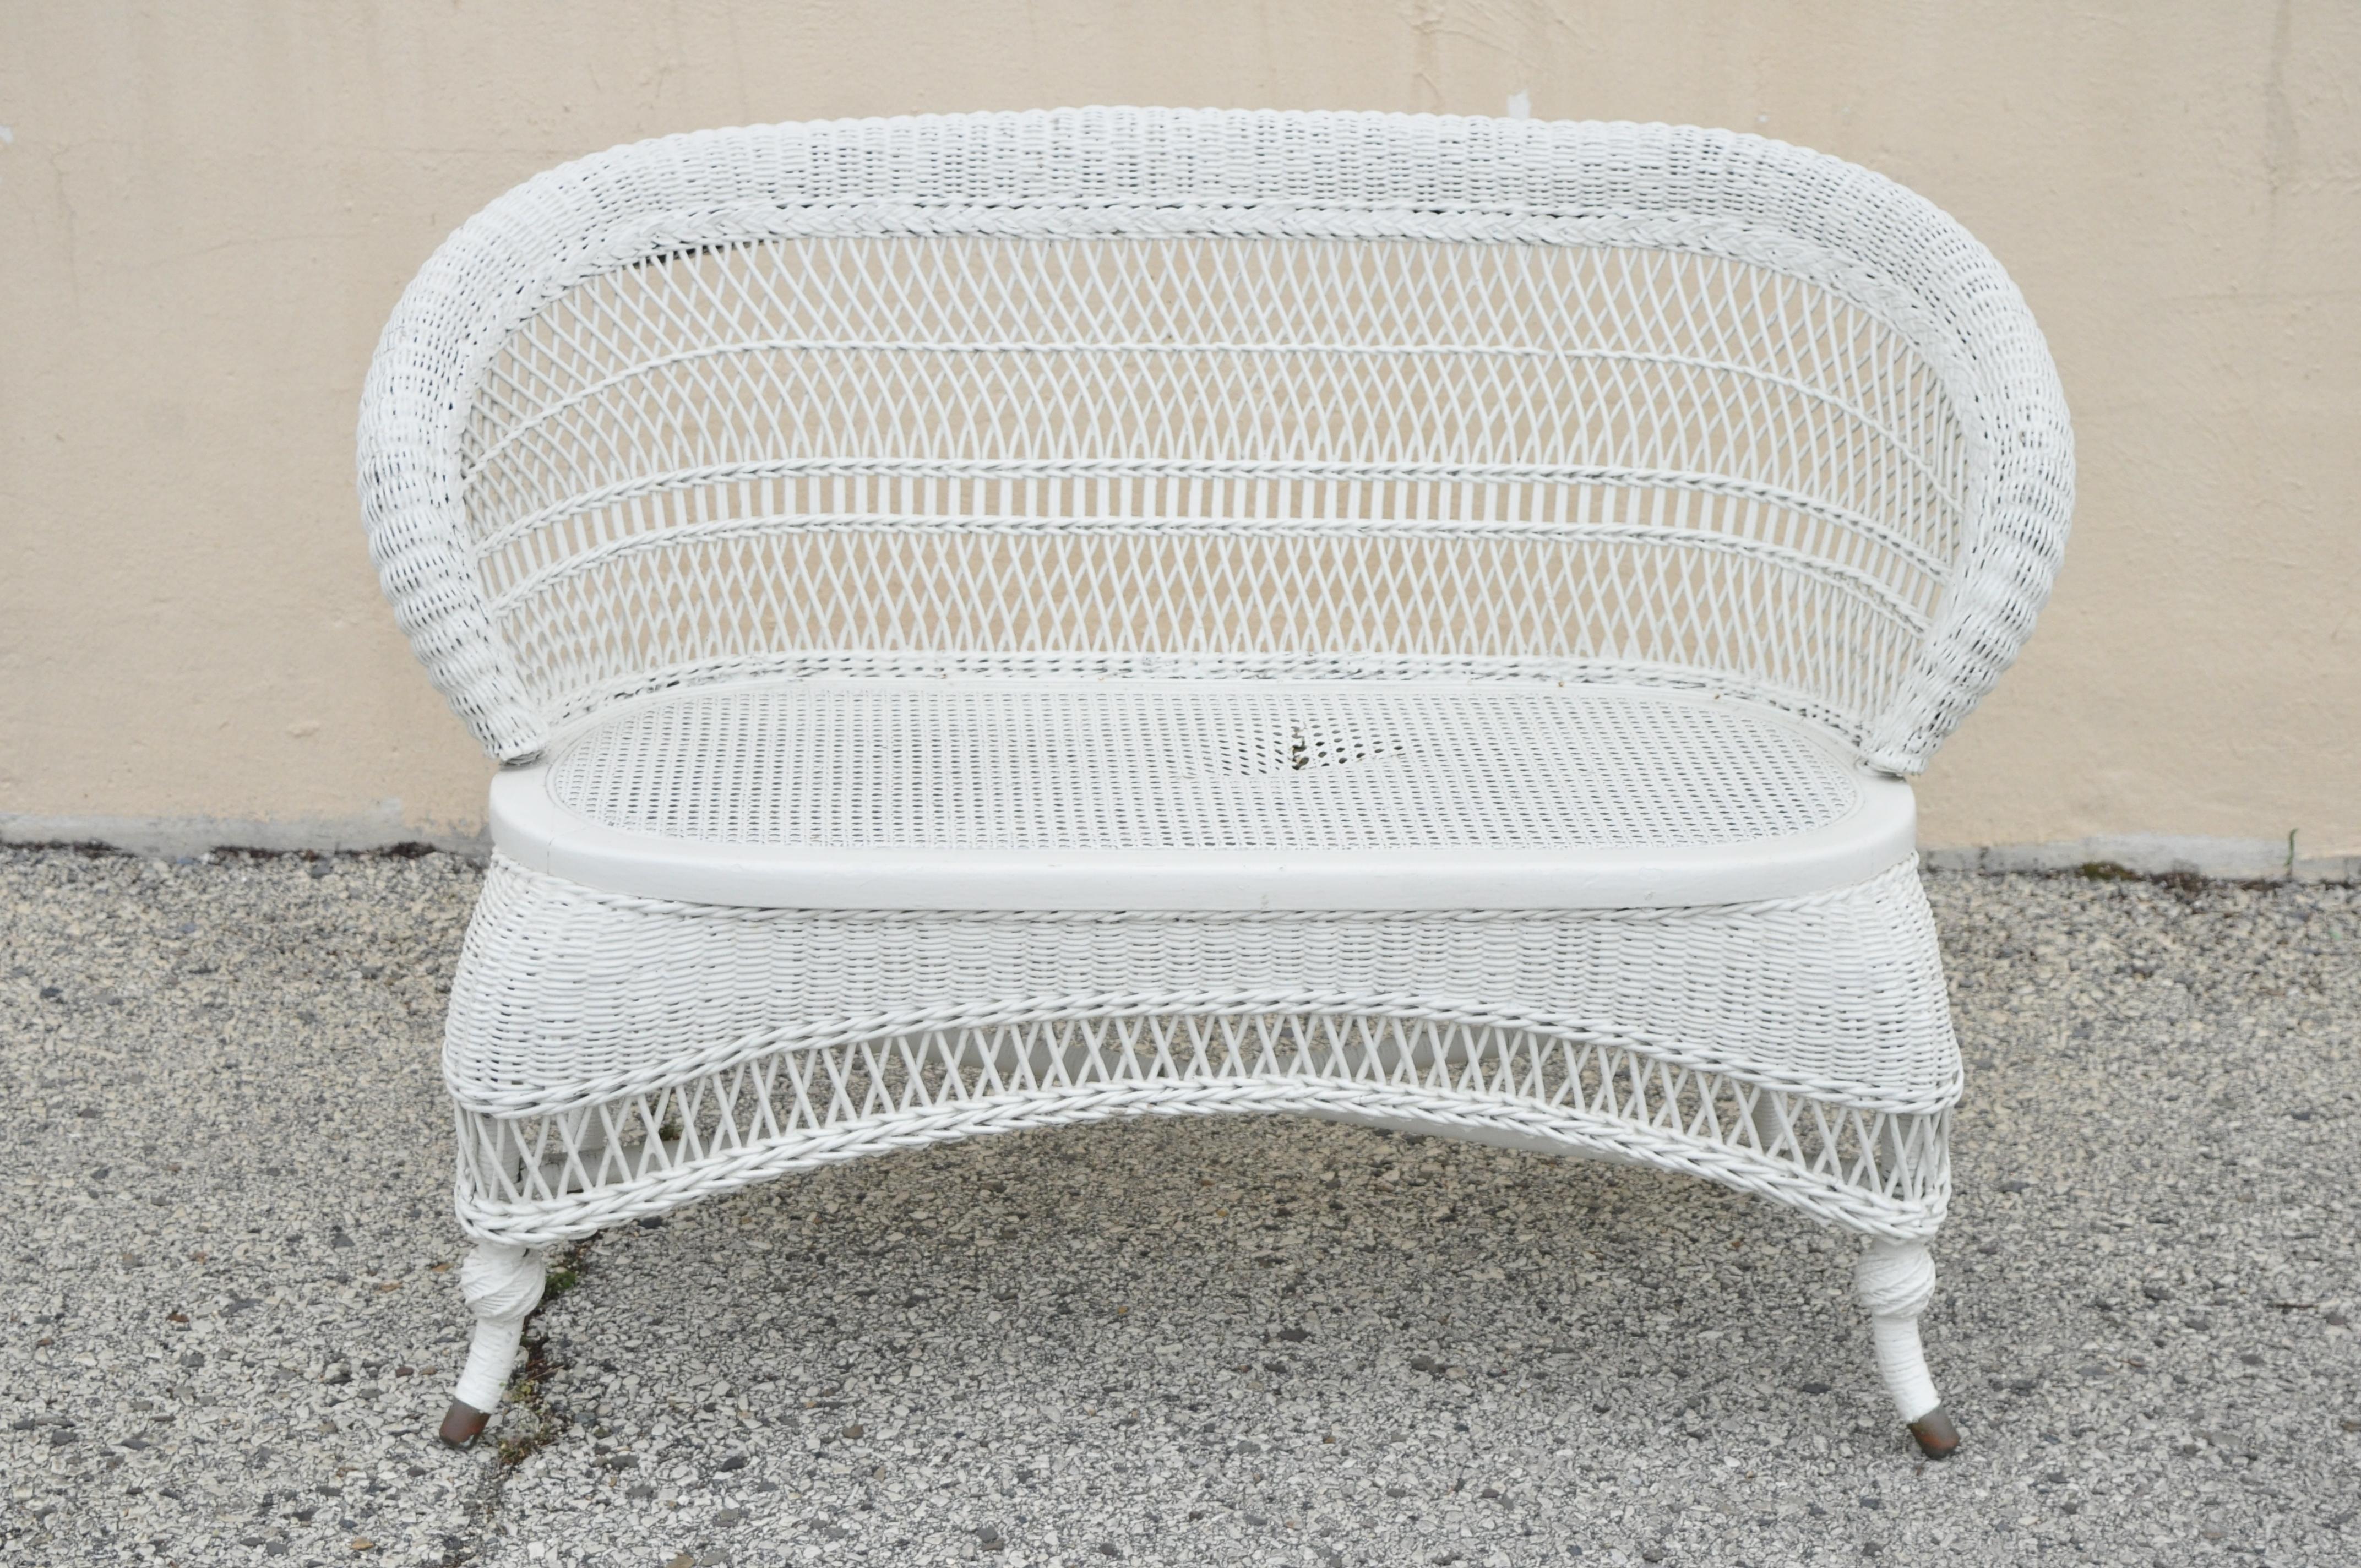 Antique Victorian white wicker barrel back small settee loveseat sofa with cane seat. Item features brass capped feet, nice smaller size, woven wicker frame, cane seat, shapely barrel back, very nice antique item. Circa 1900s. Measurements: 30